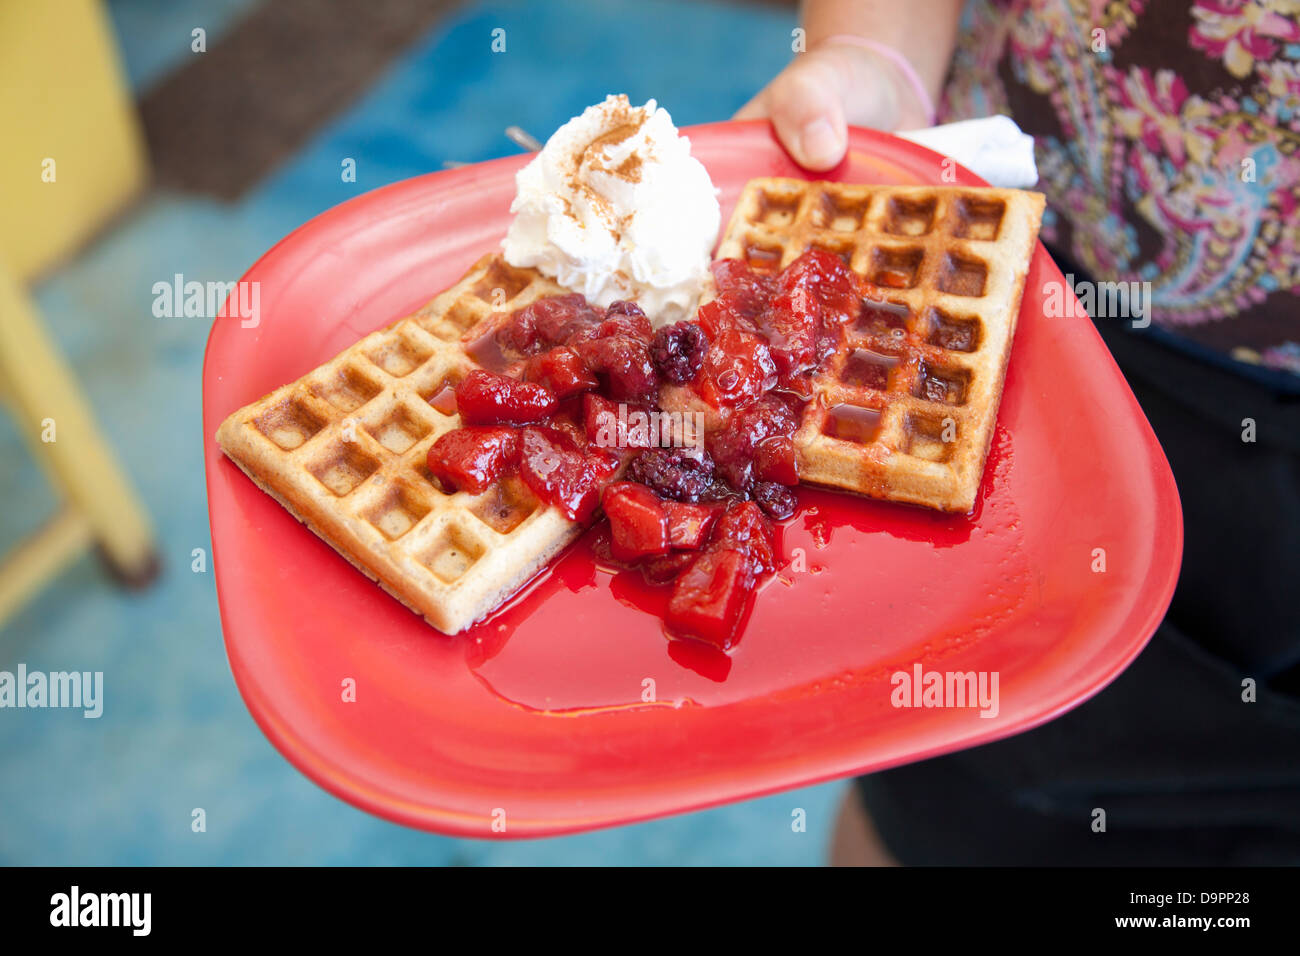 Woman holding plate of waffles Stock Photo